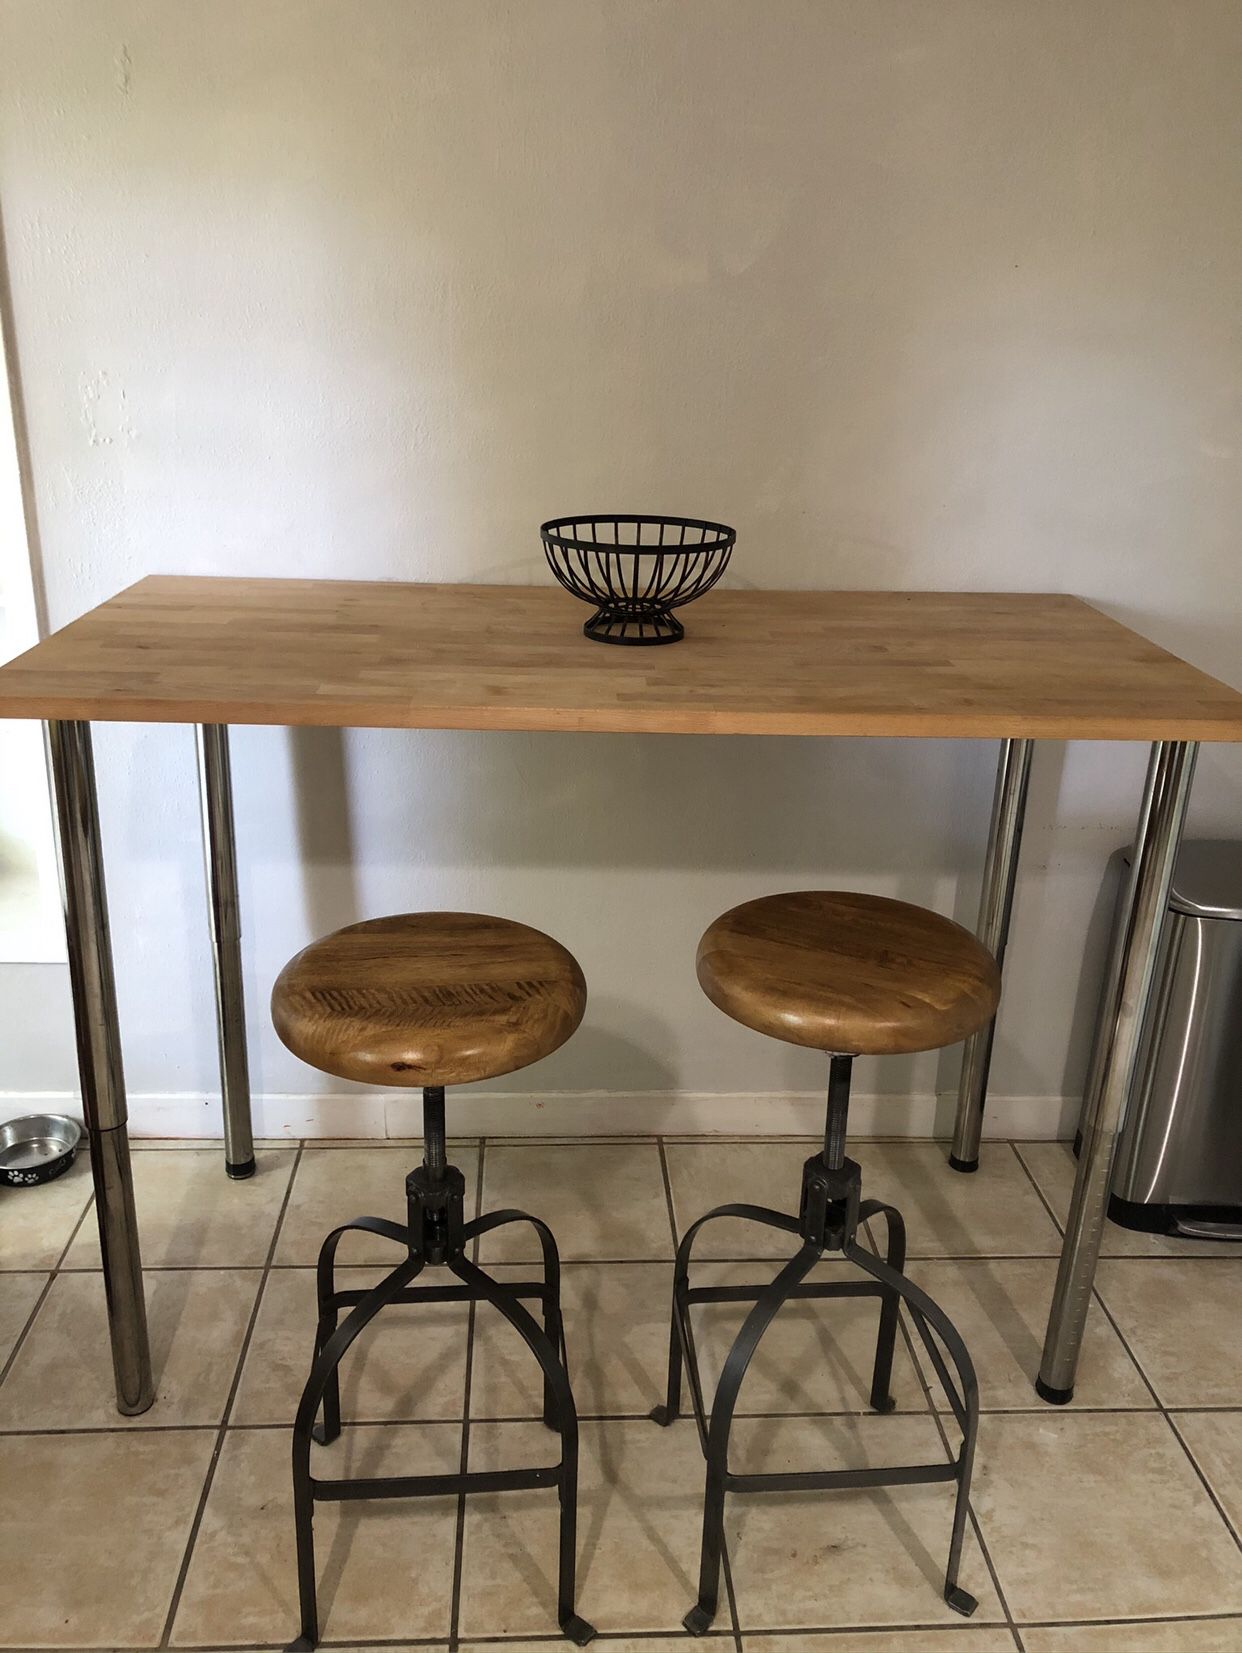 Kitchen table with two bar stools